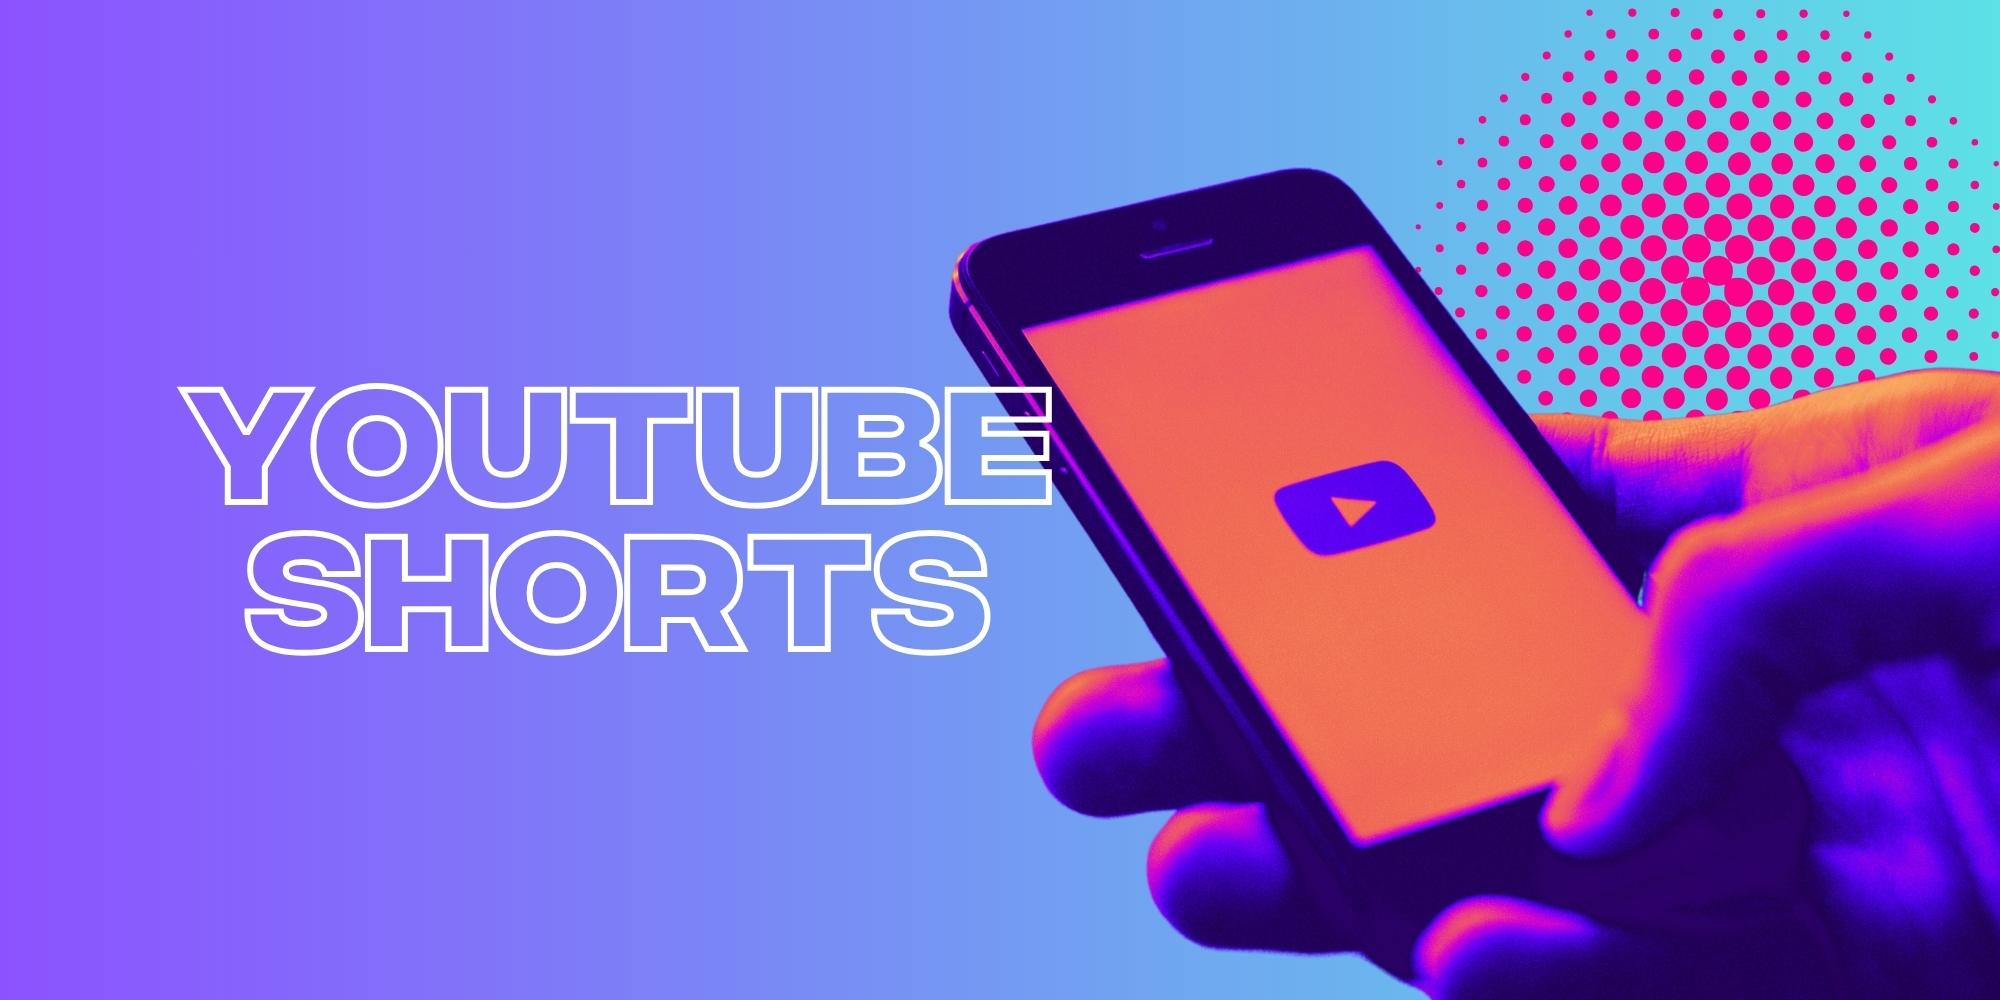 News Just In: This Is How To Leverage YouTube Shorts